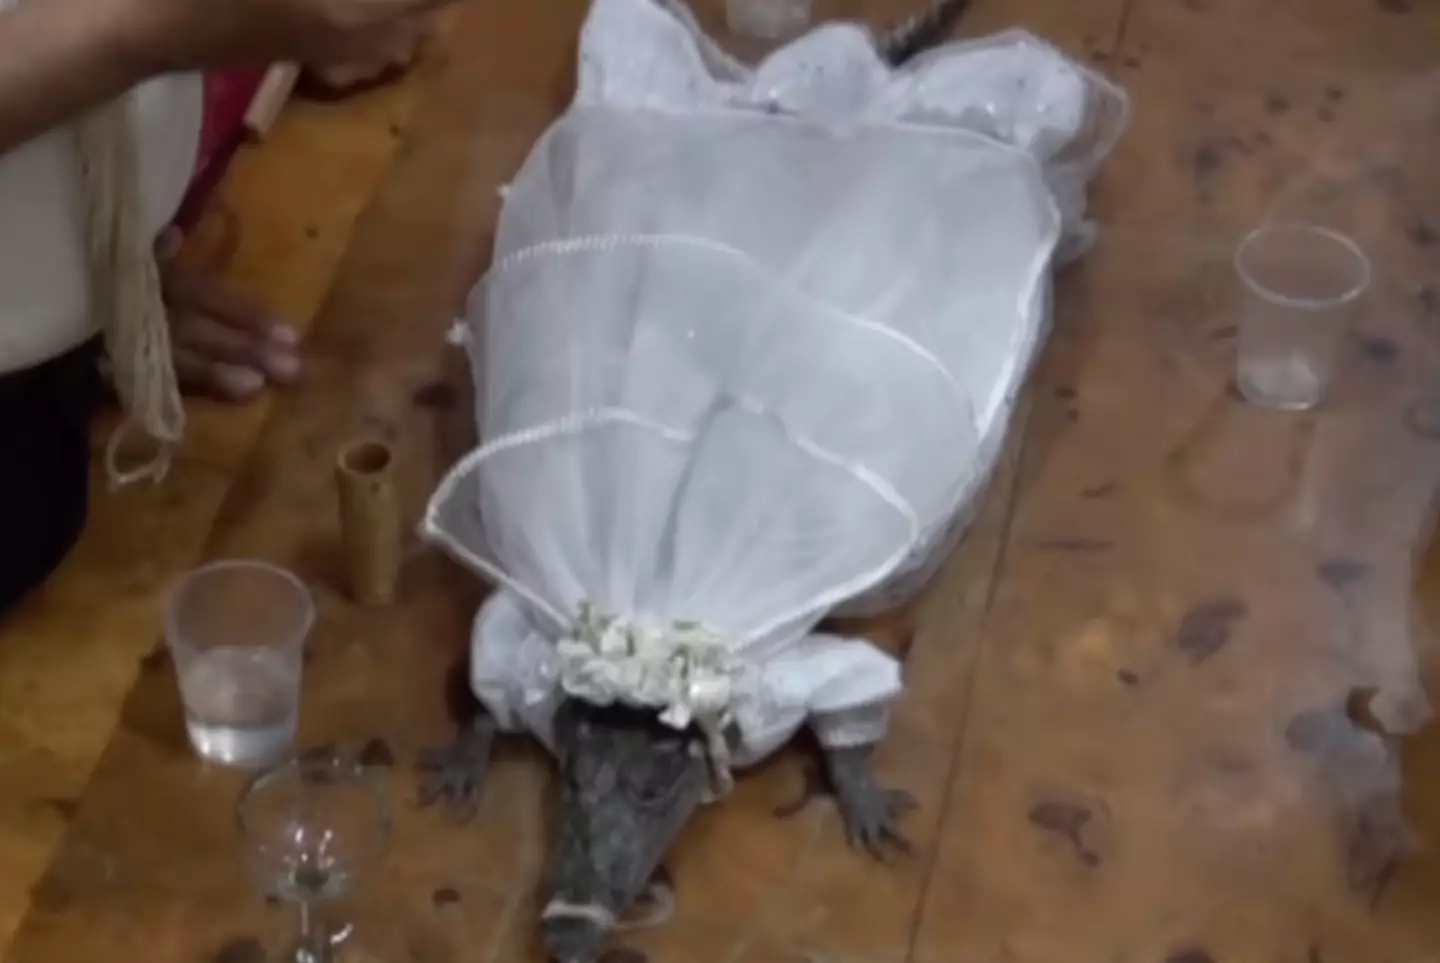 Mayor Victor Hugo Sosa married the 'princess' alligator in an age-old ceremony.